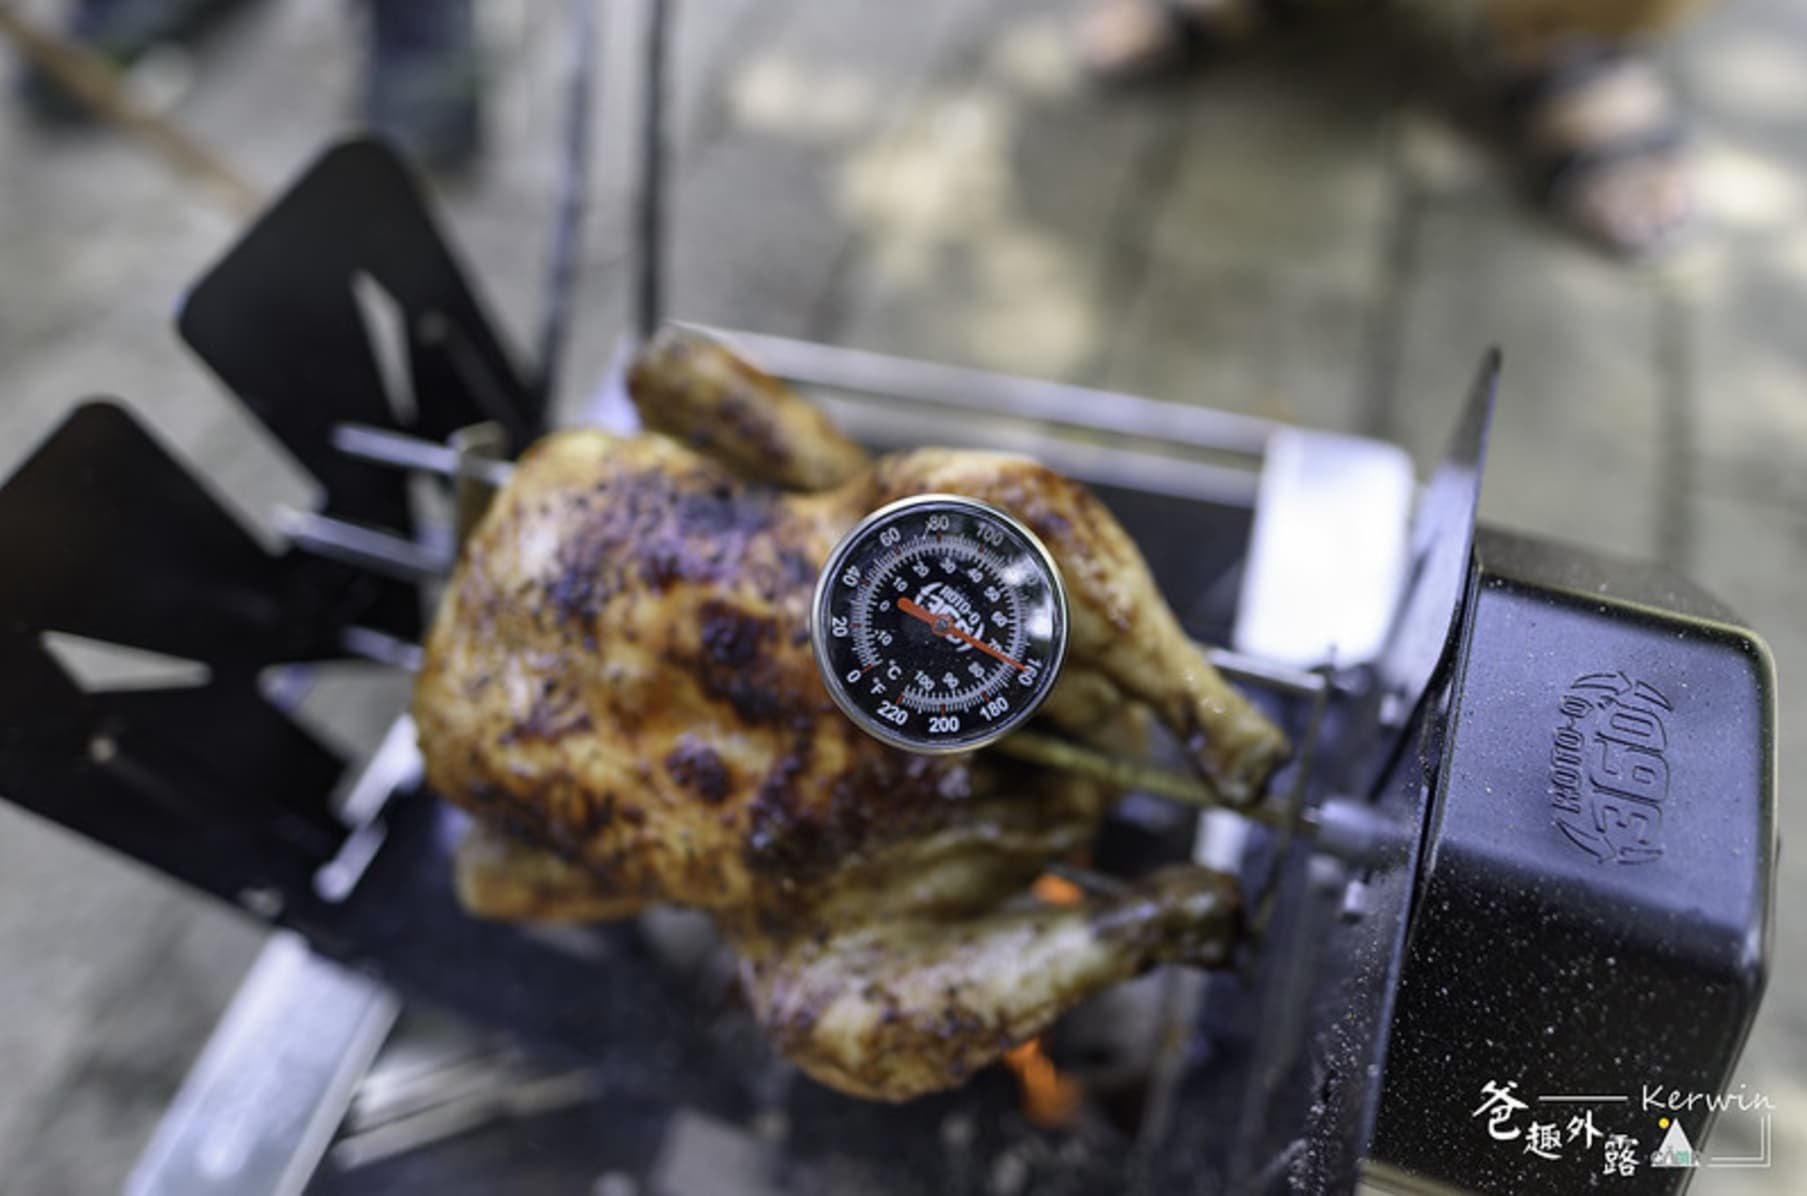 ROTO-Q 360The Worlds First Non Electric Self-Rotating Rotisserie